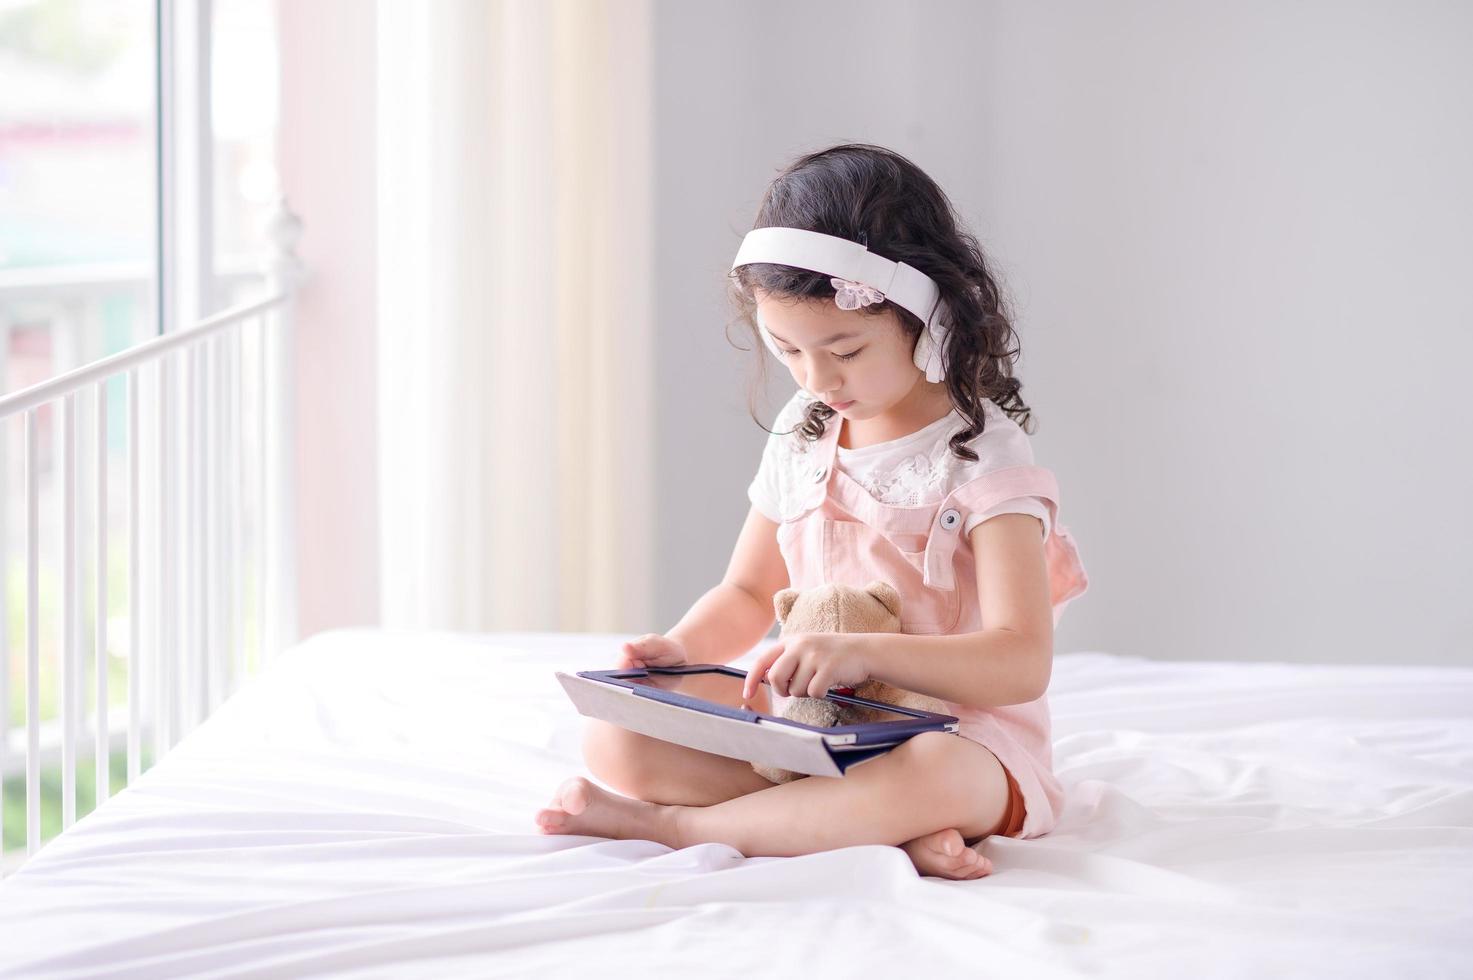 A cute Asian girl is using a tablet for fun playing games and learning  in the room photo